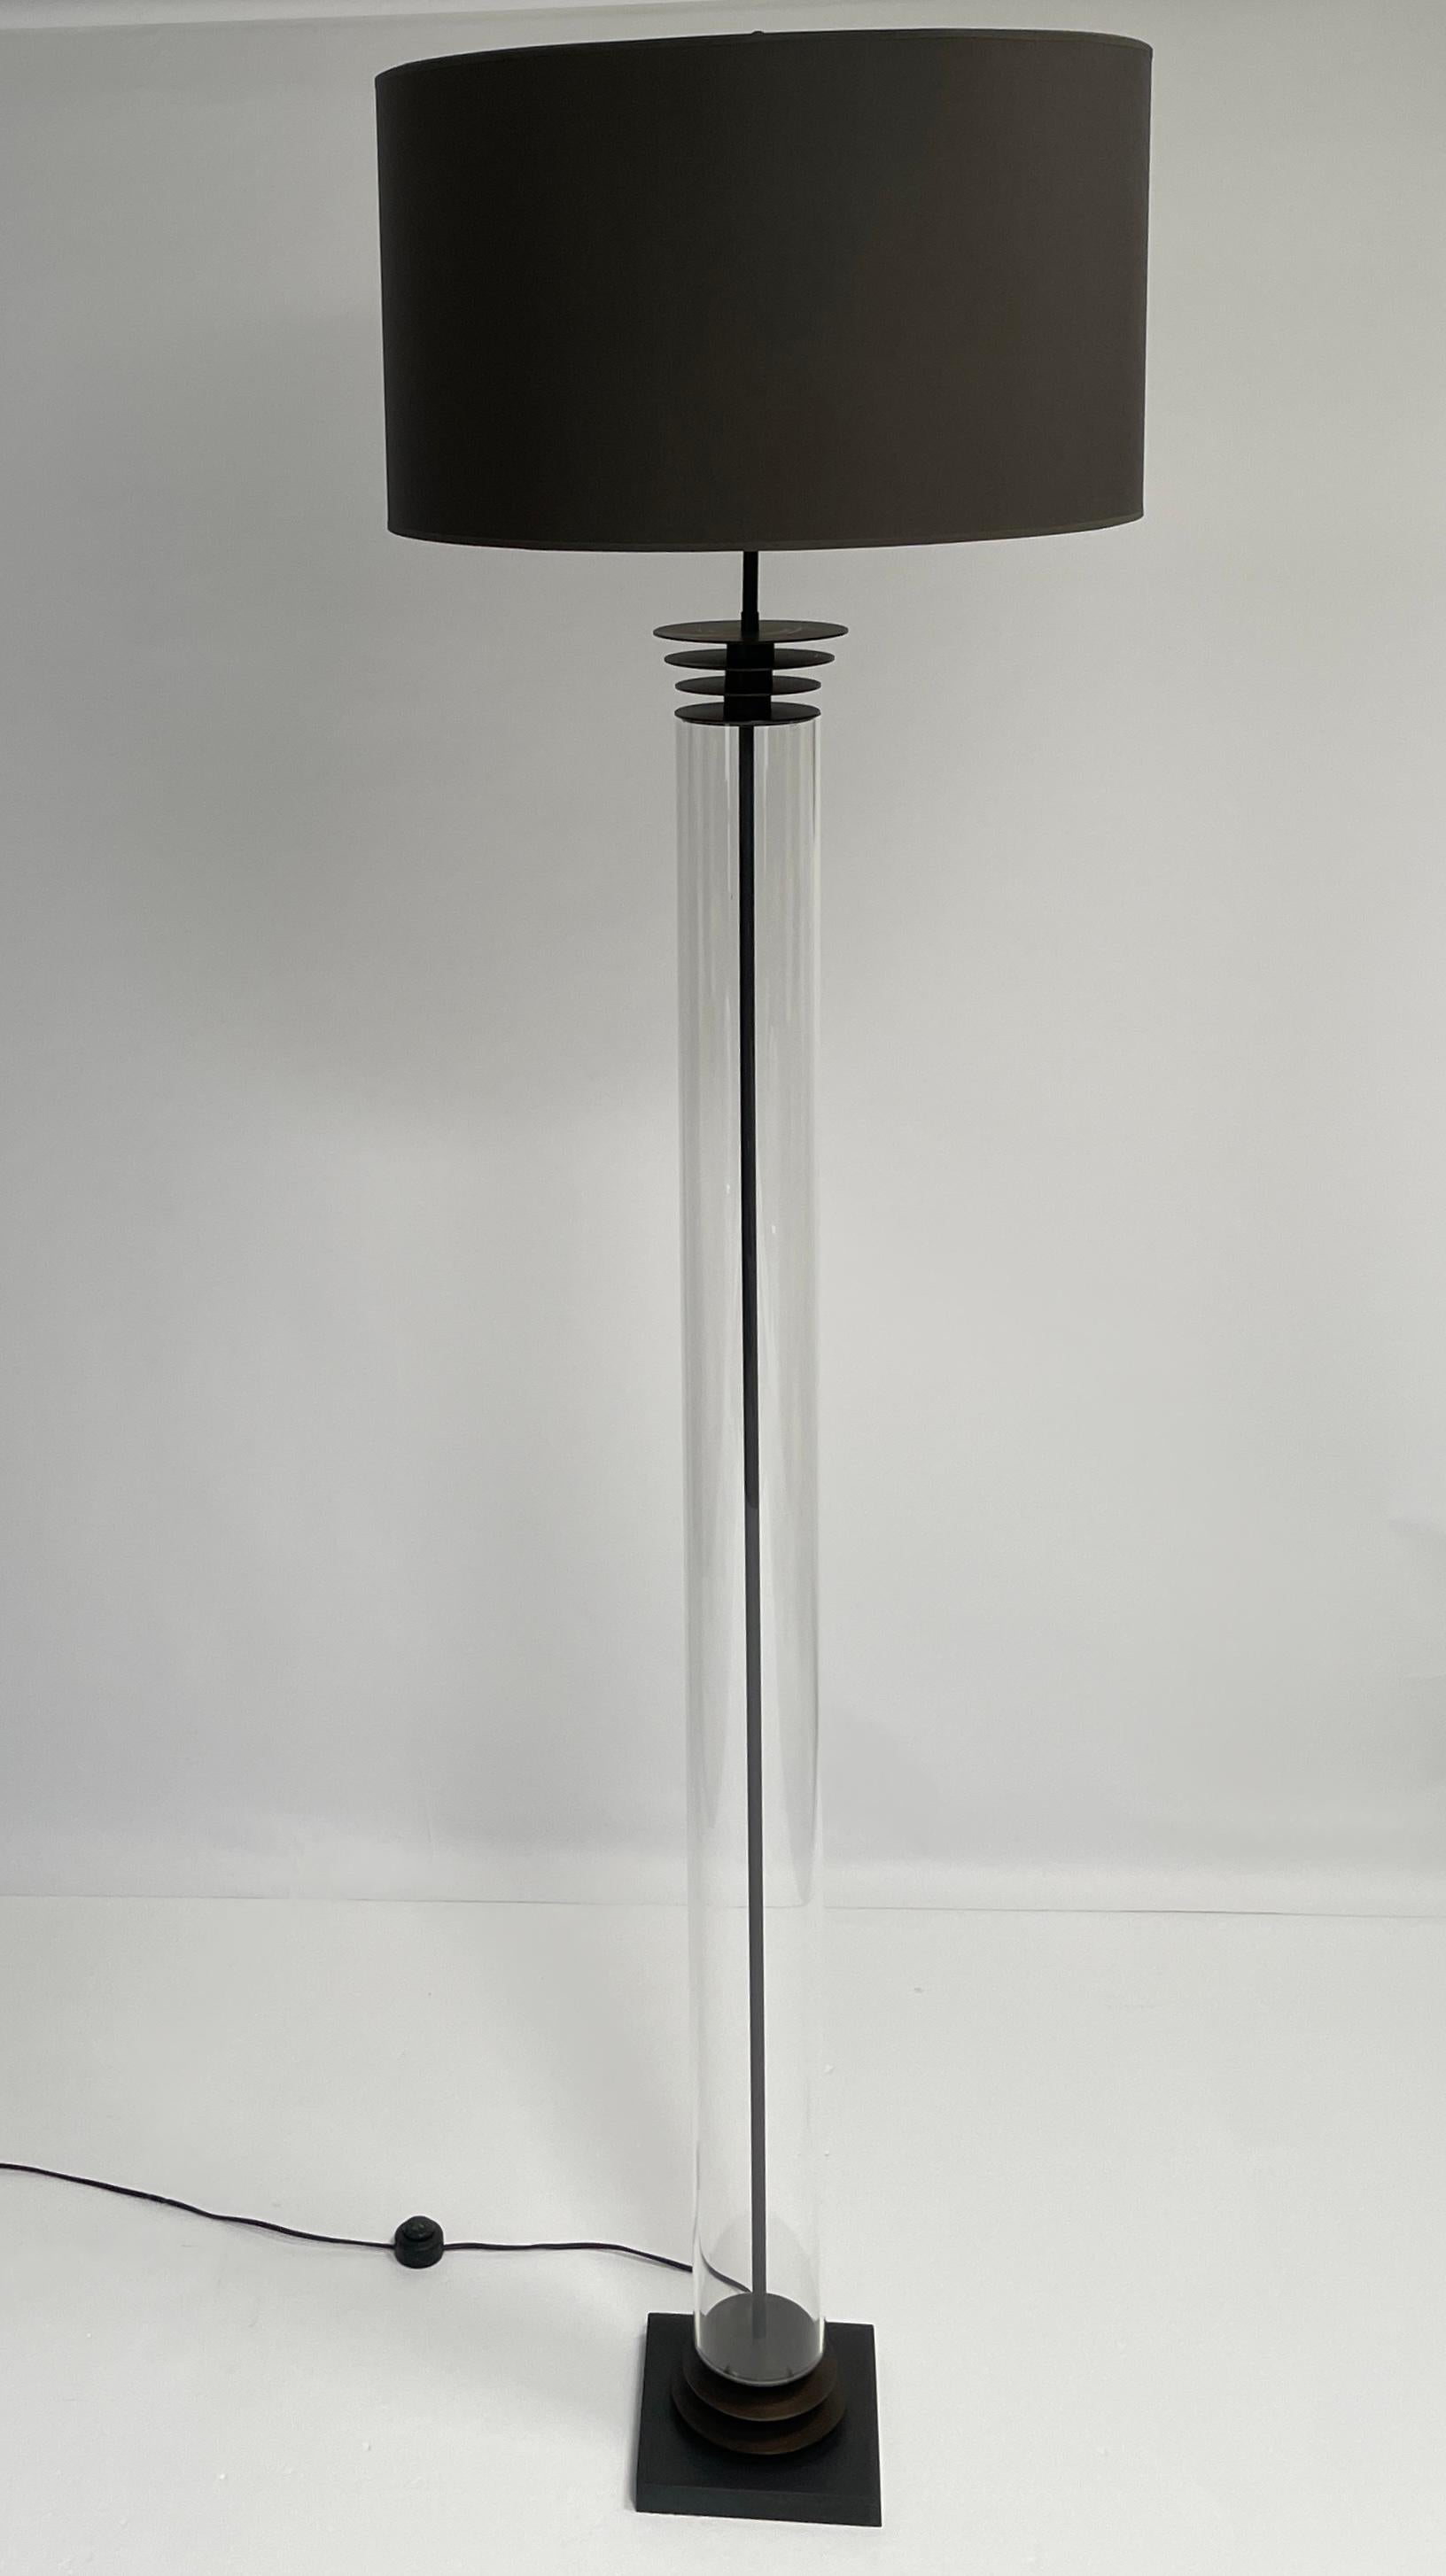 This large scale floor lamp will stand out in your homes decor. The fixture has 1940's Art Deco inspirations. The body is a large glass tube.which is capped with three discs which like the rest of the hardware has an oil rubbed bronze patina. The